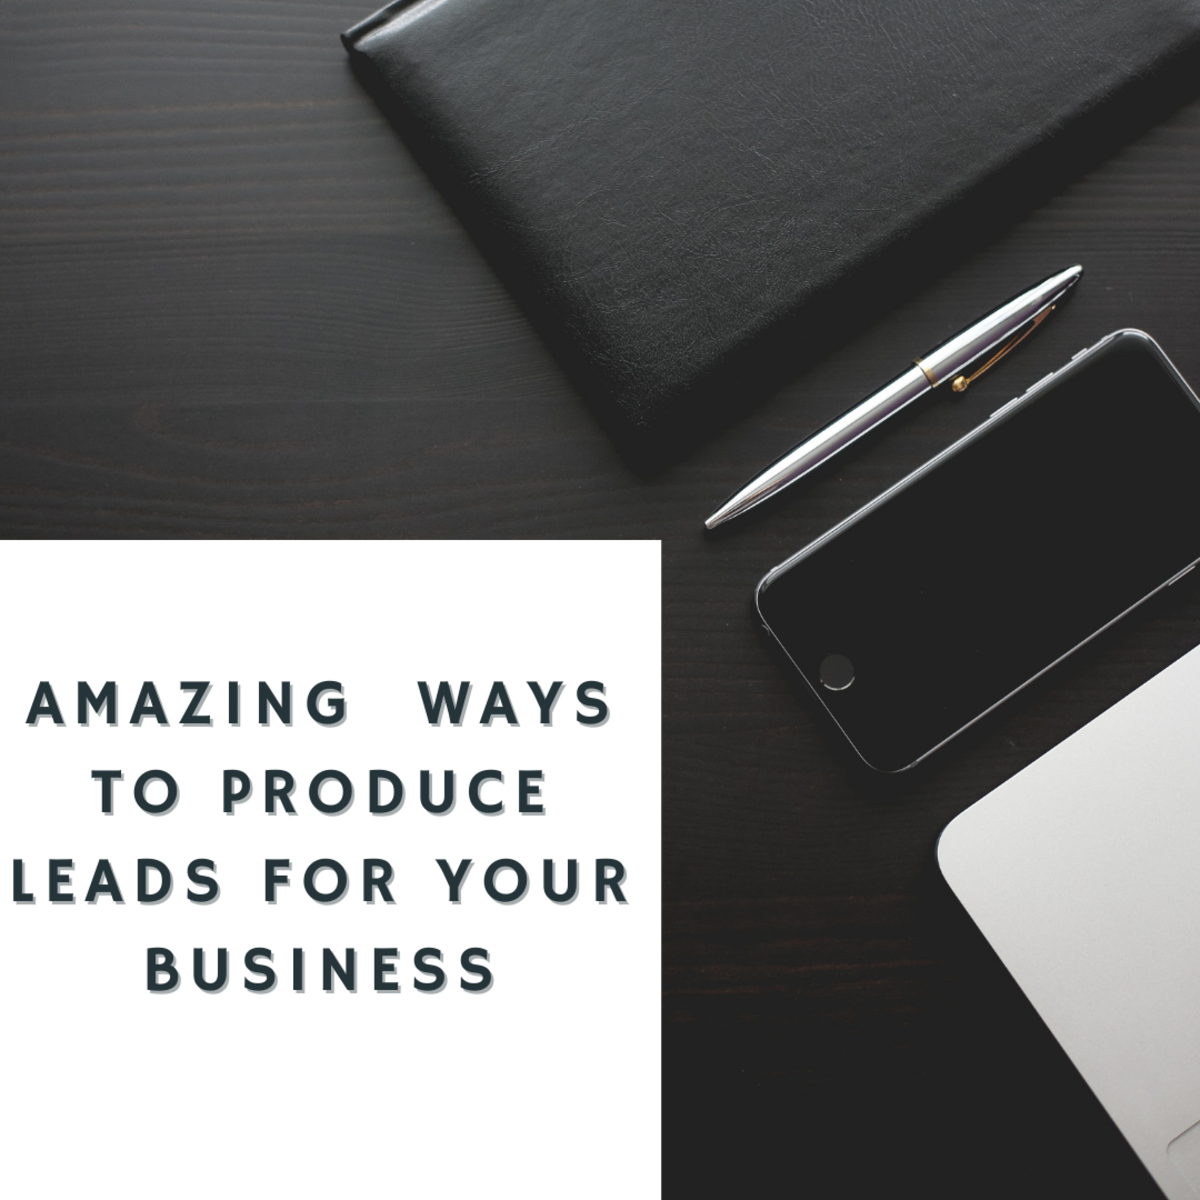 Amazing ways to produce leads for your business